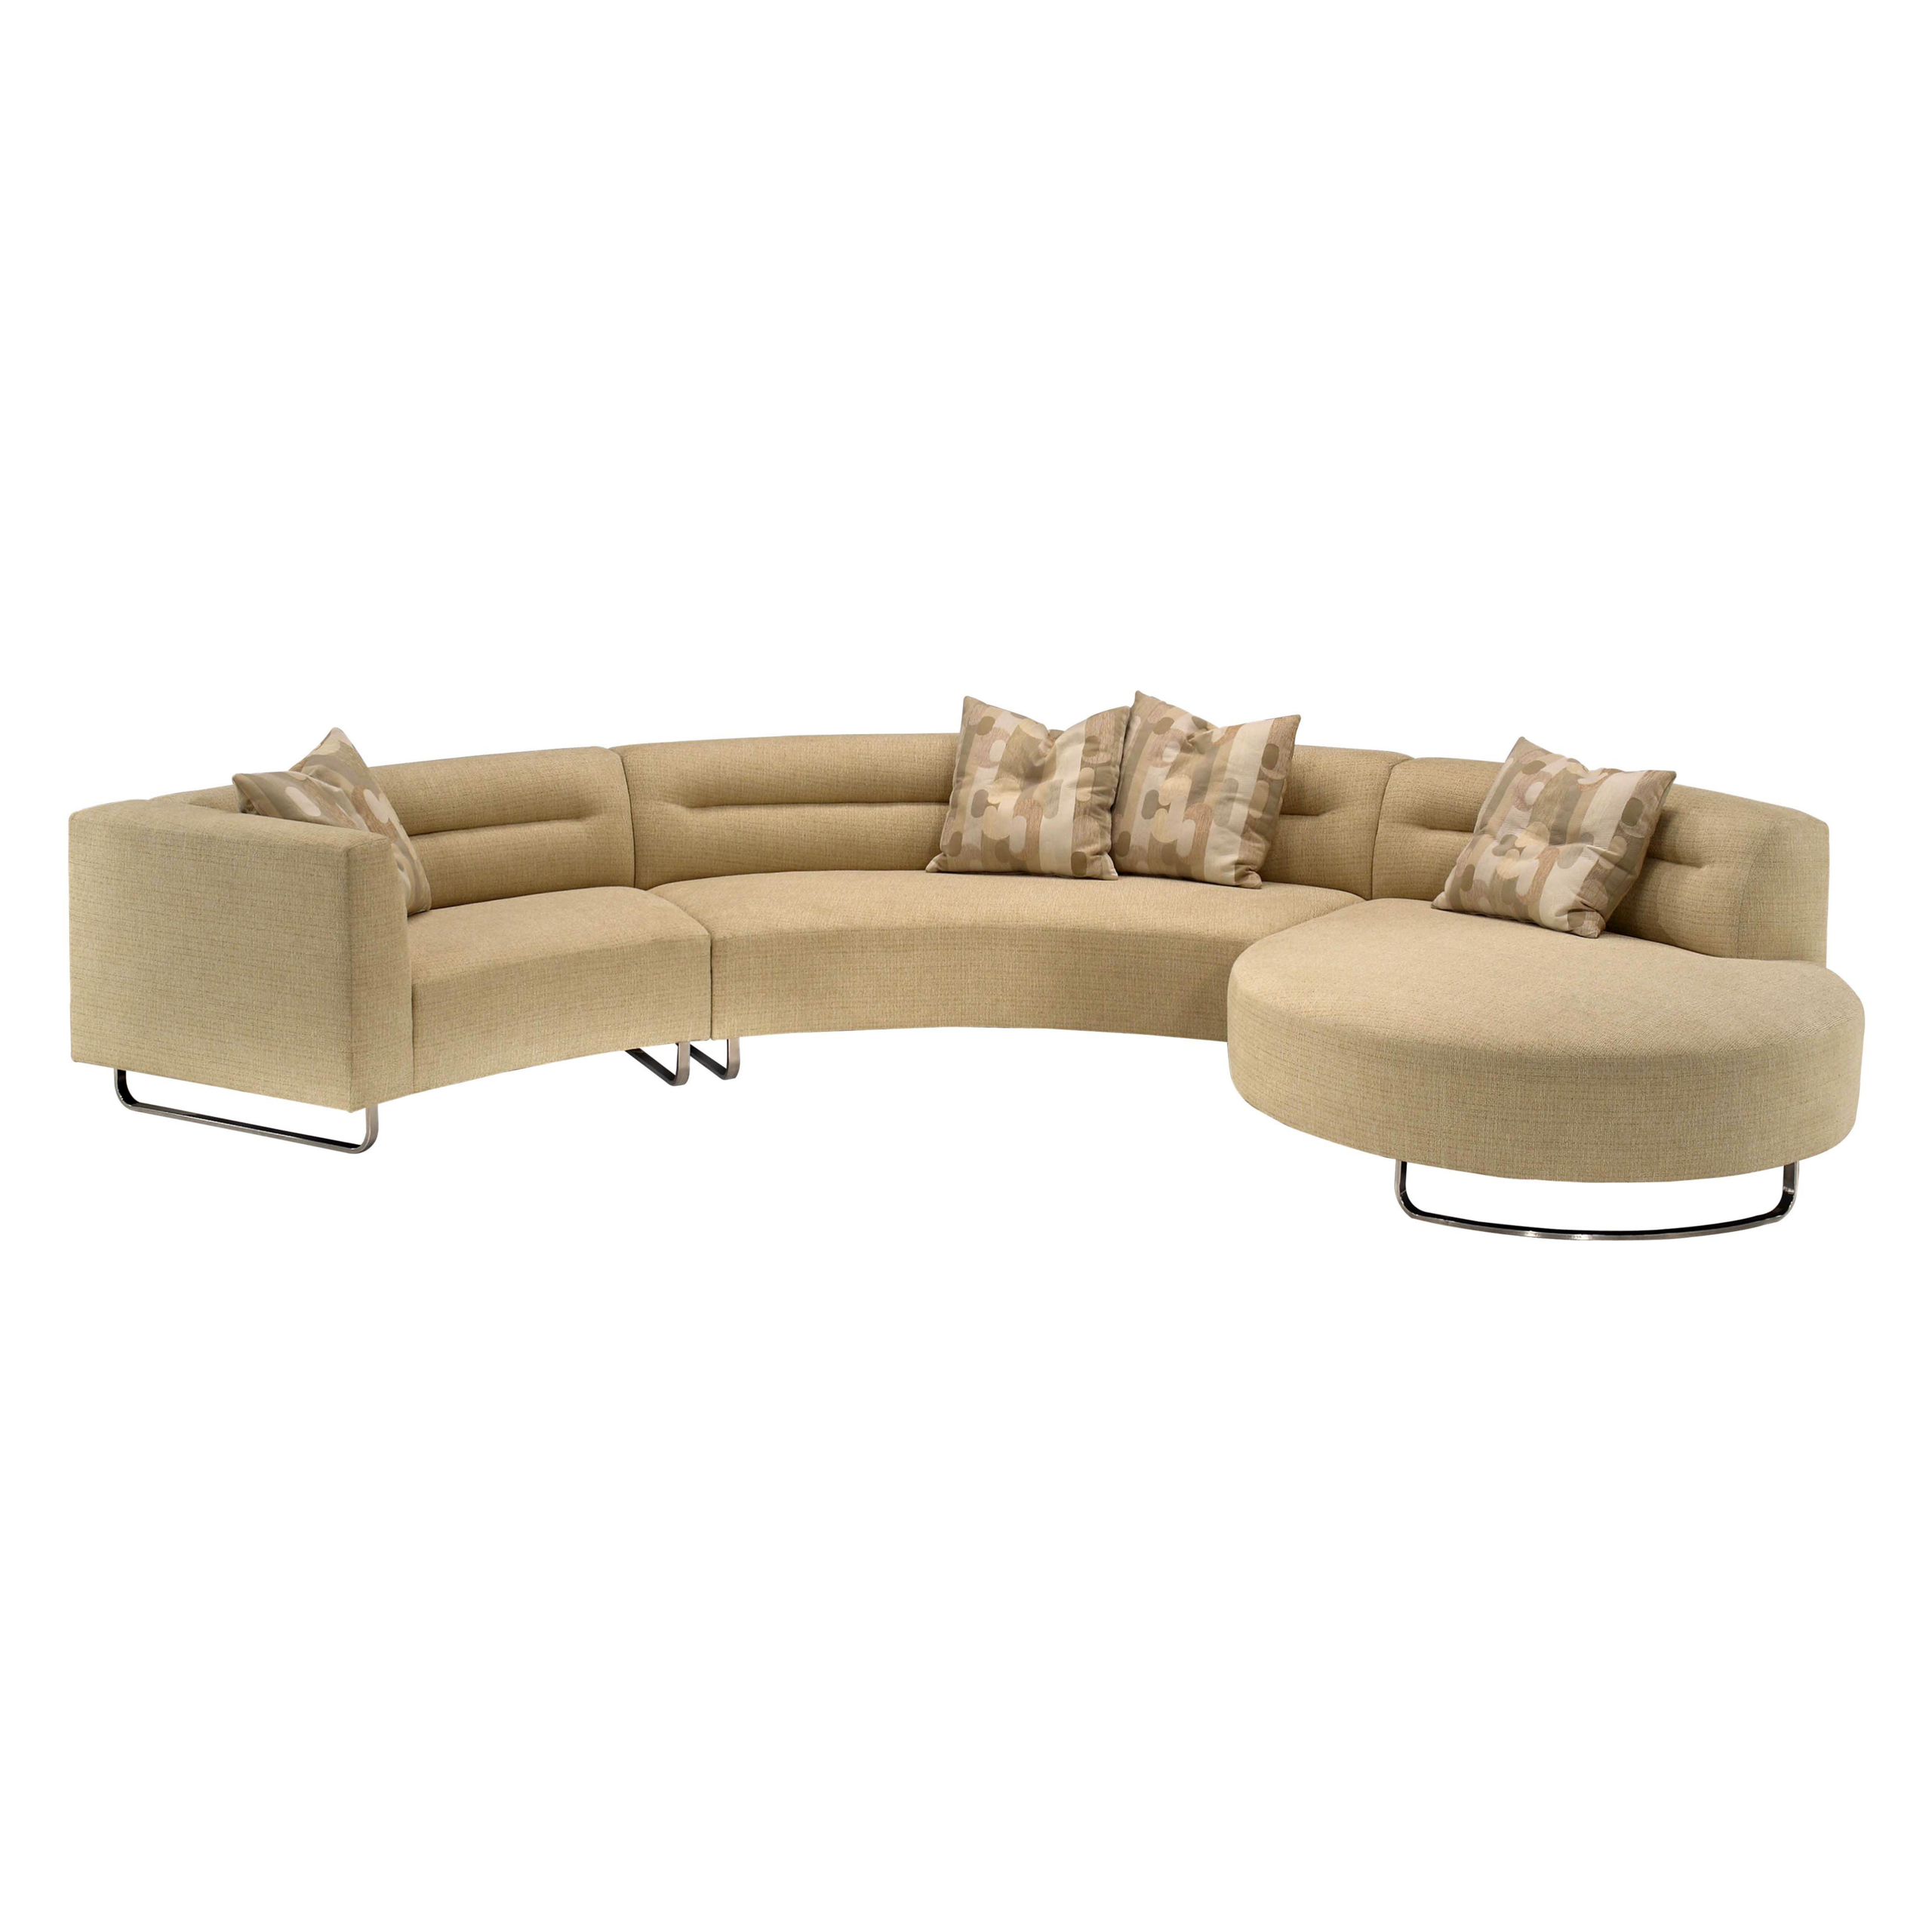 Lazar calcutta upholstered sectional sofa with accent pillows 5600 curve